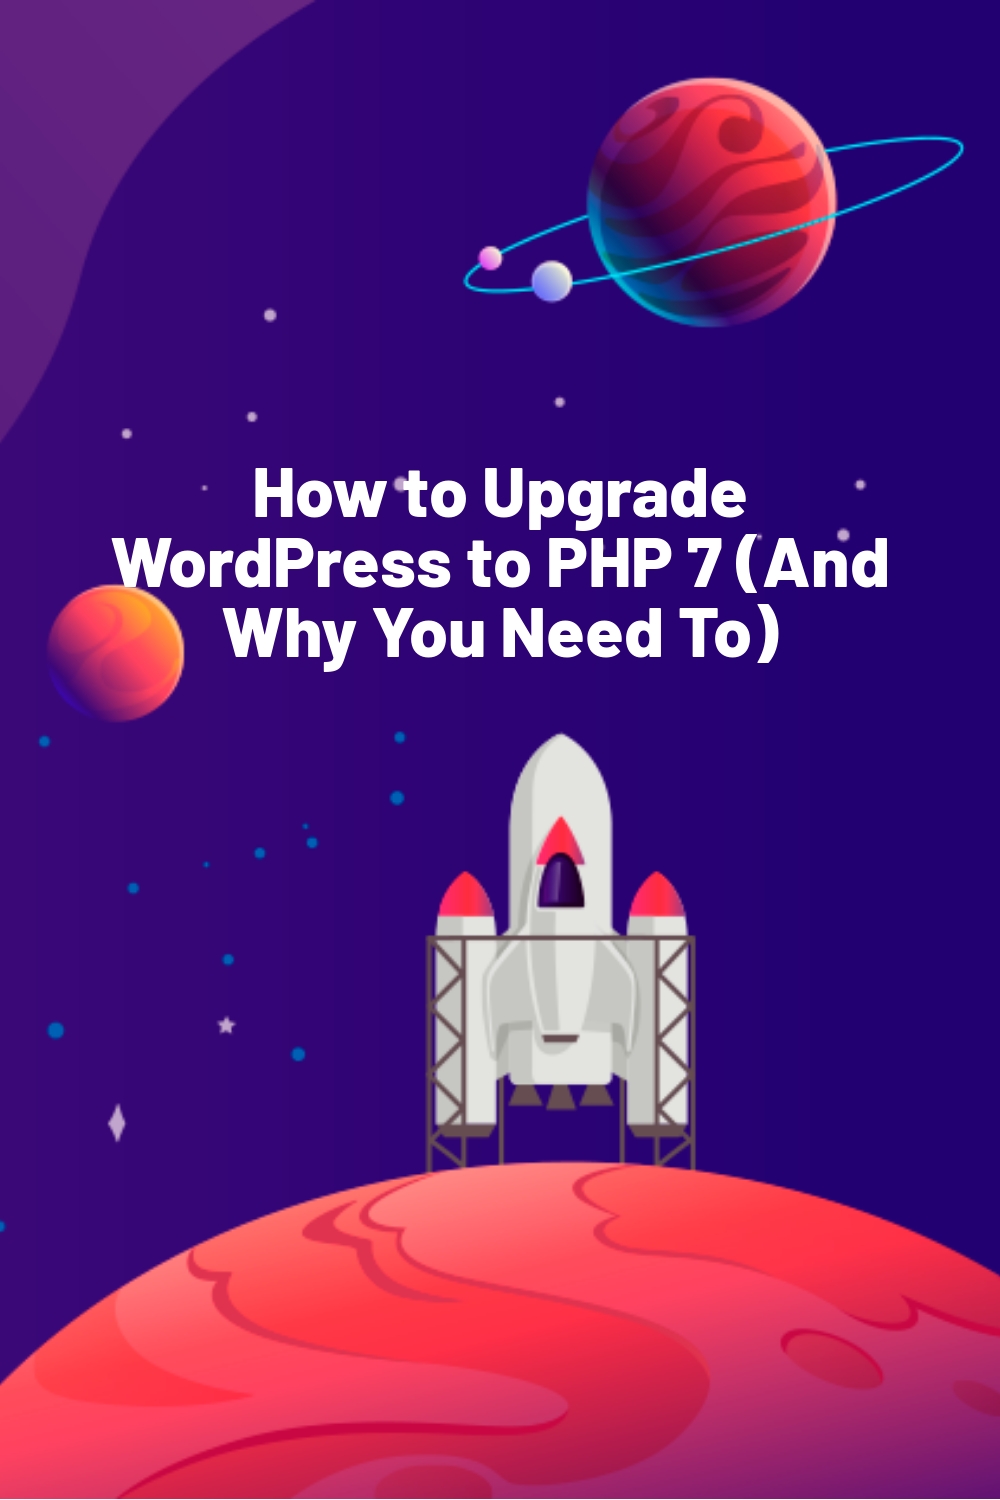 How to Upgrade WordPress to PHP 7 (And Why You Need To)